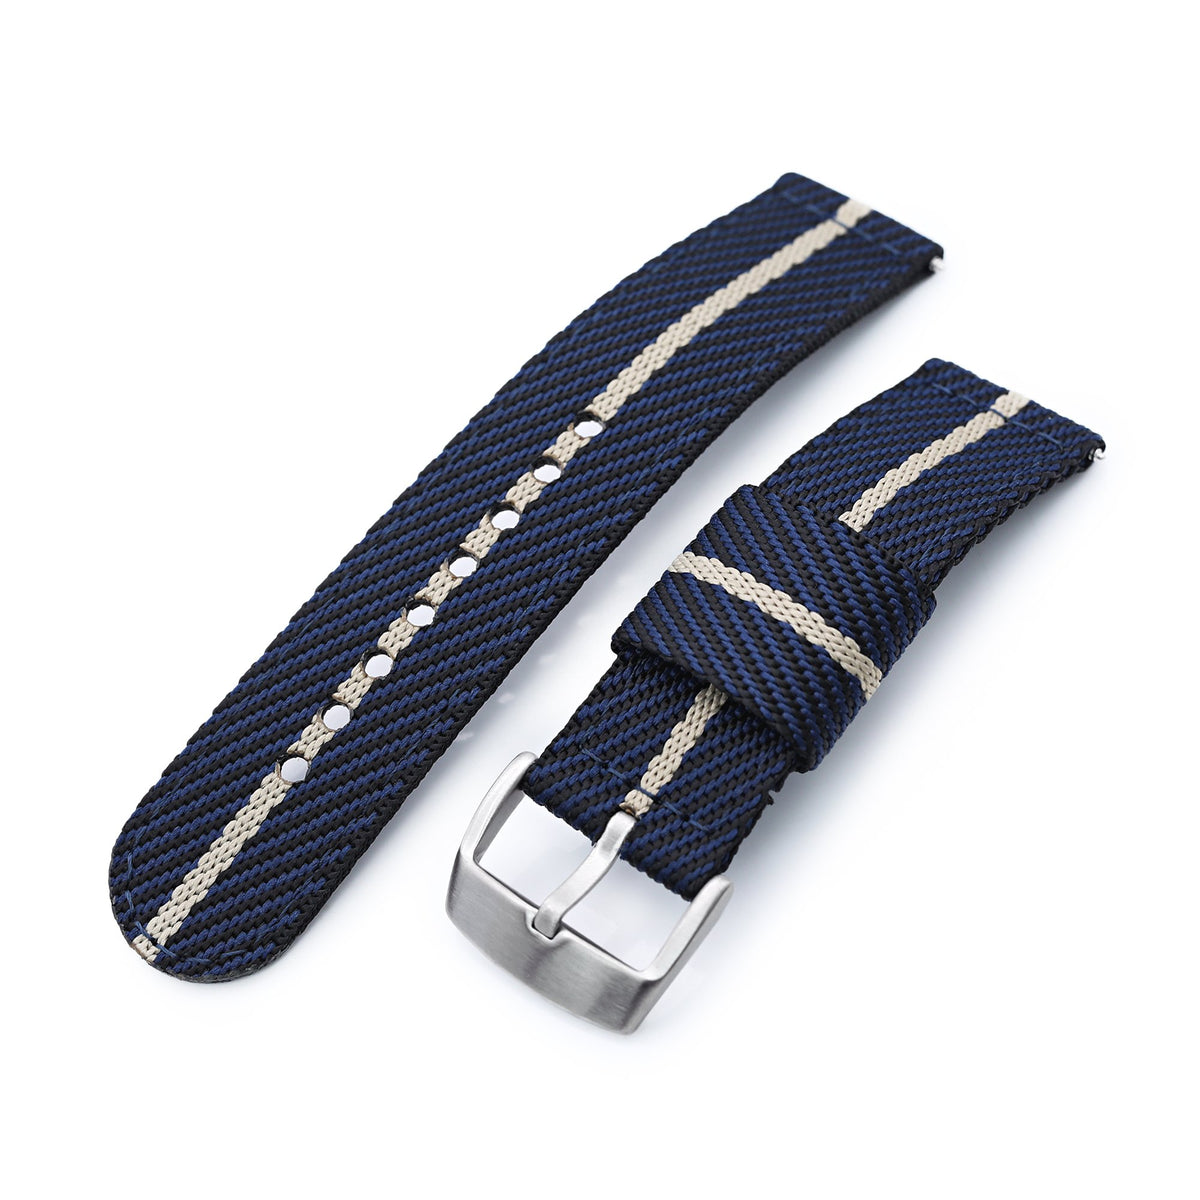 22mm 2-pcs Nylon Watch Band, Quick Release, Blue &amp; Khaki, Brushed Buckle Strapcode Watch Bands